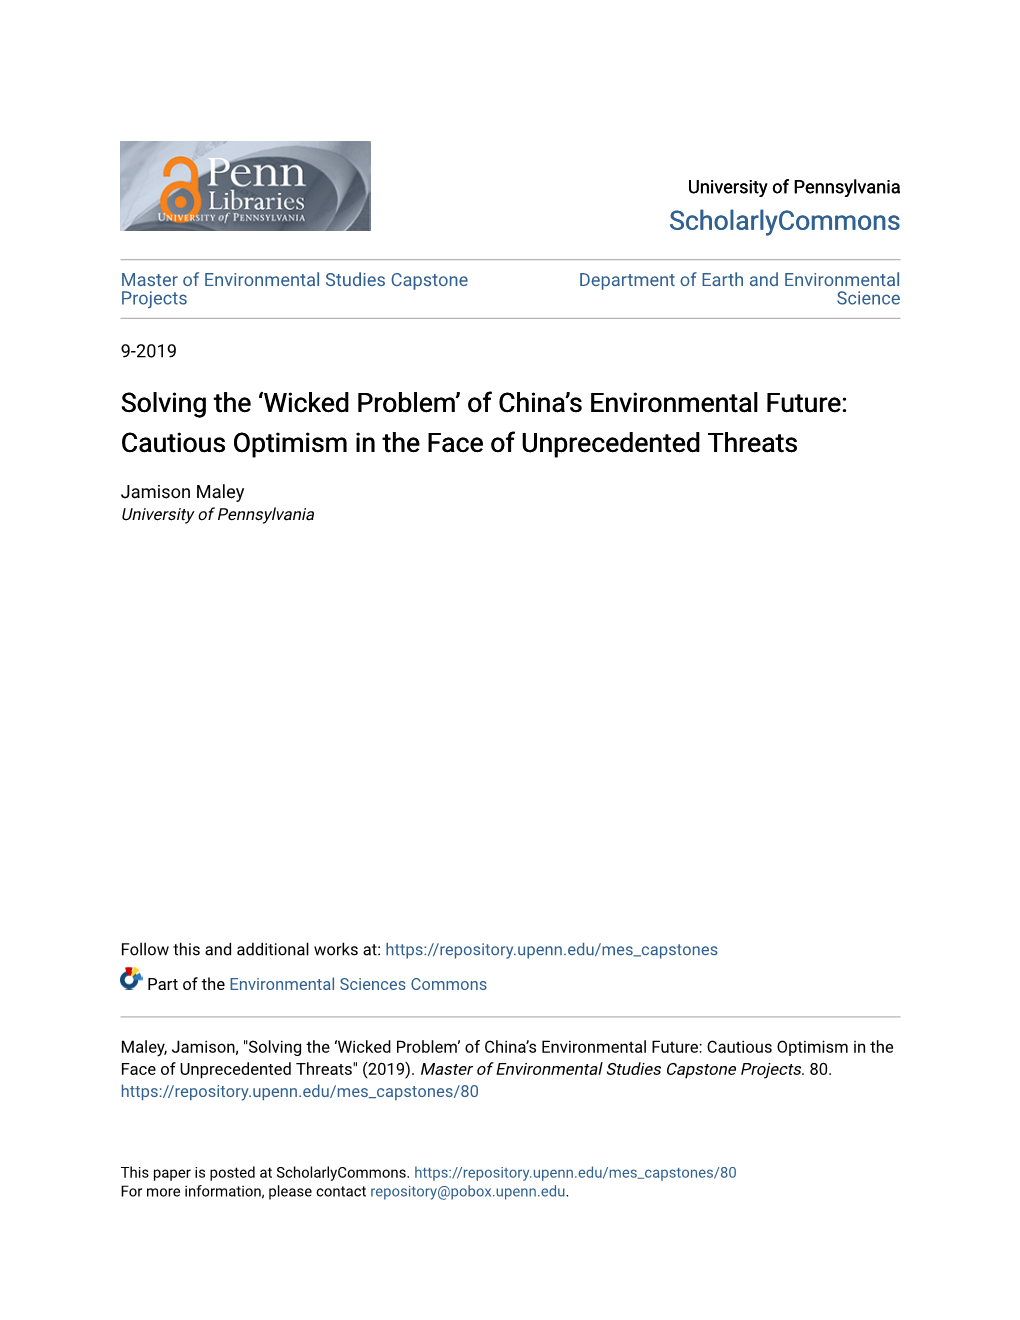 Solving the 'Wicked Problem' of China's Environmental Future